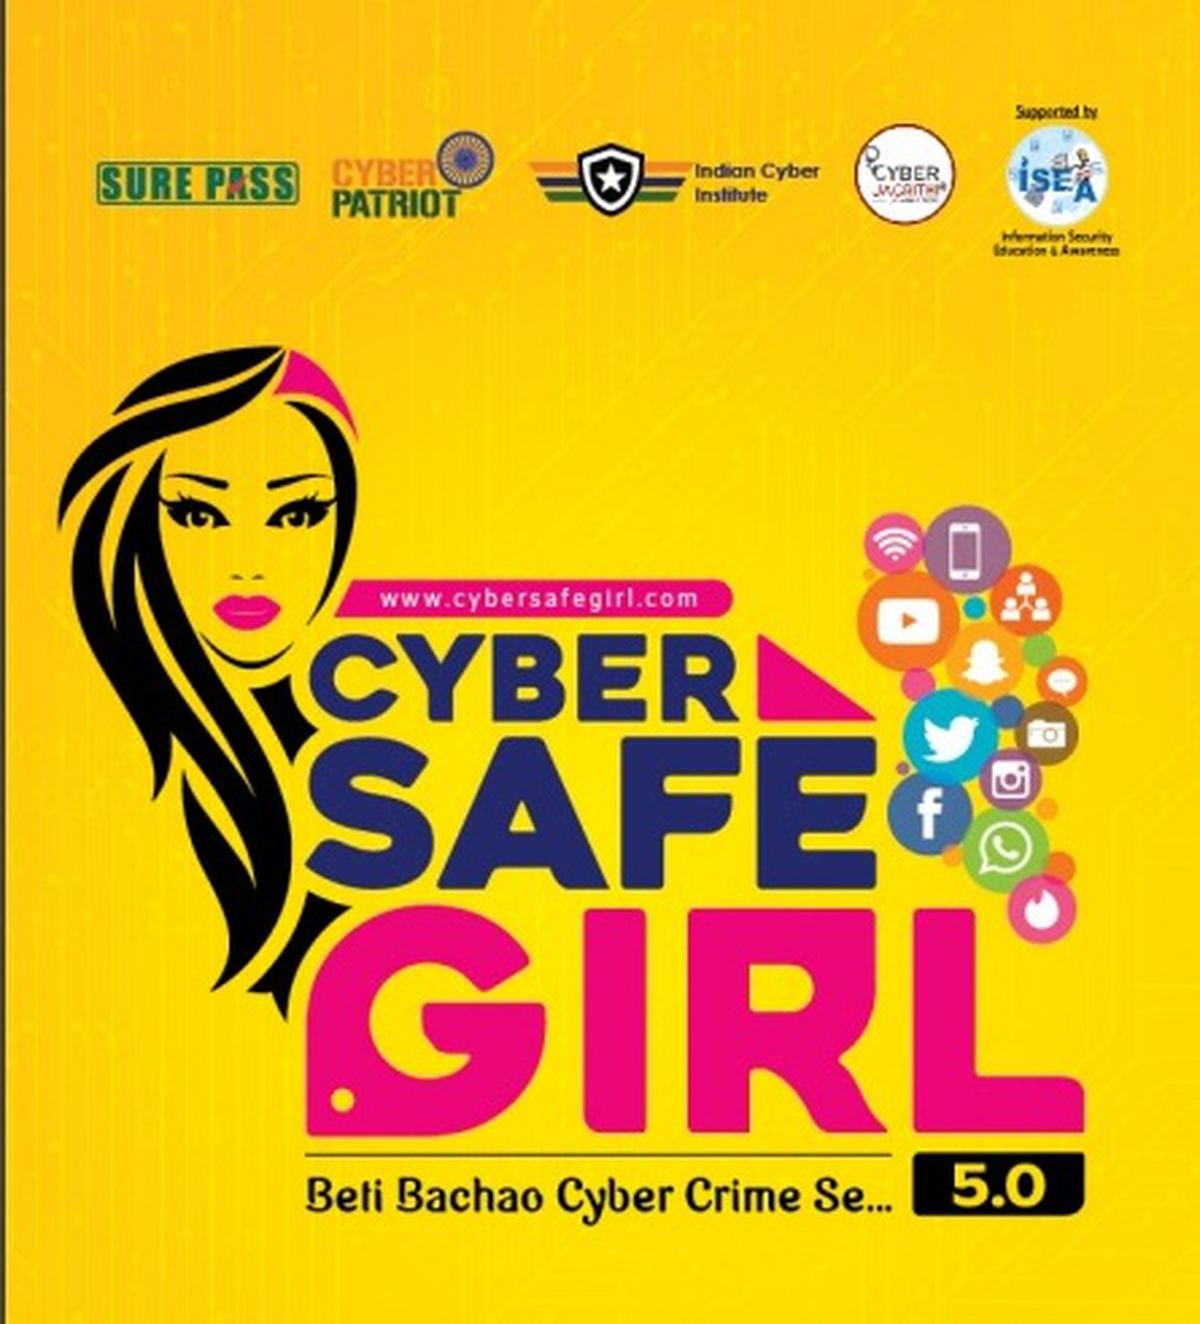 New version of Cyber Safe Girl e-book released